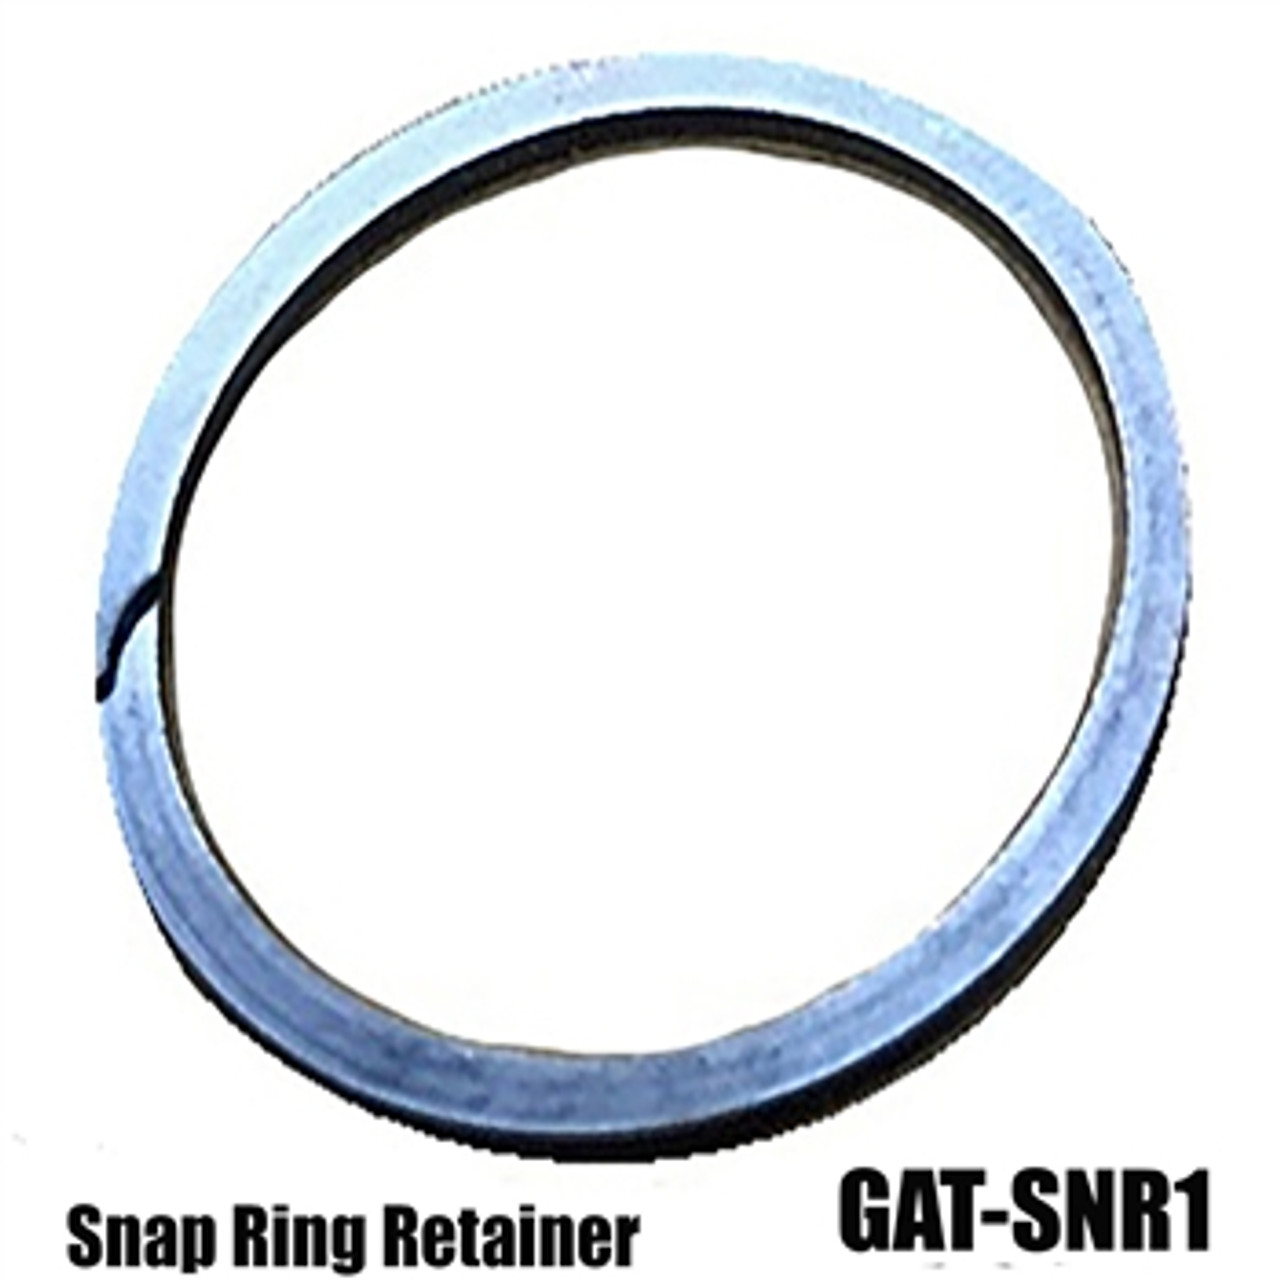 Snap Ring Retainer - For Power Team Rams